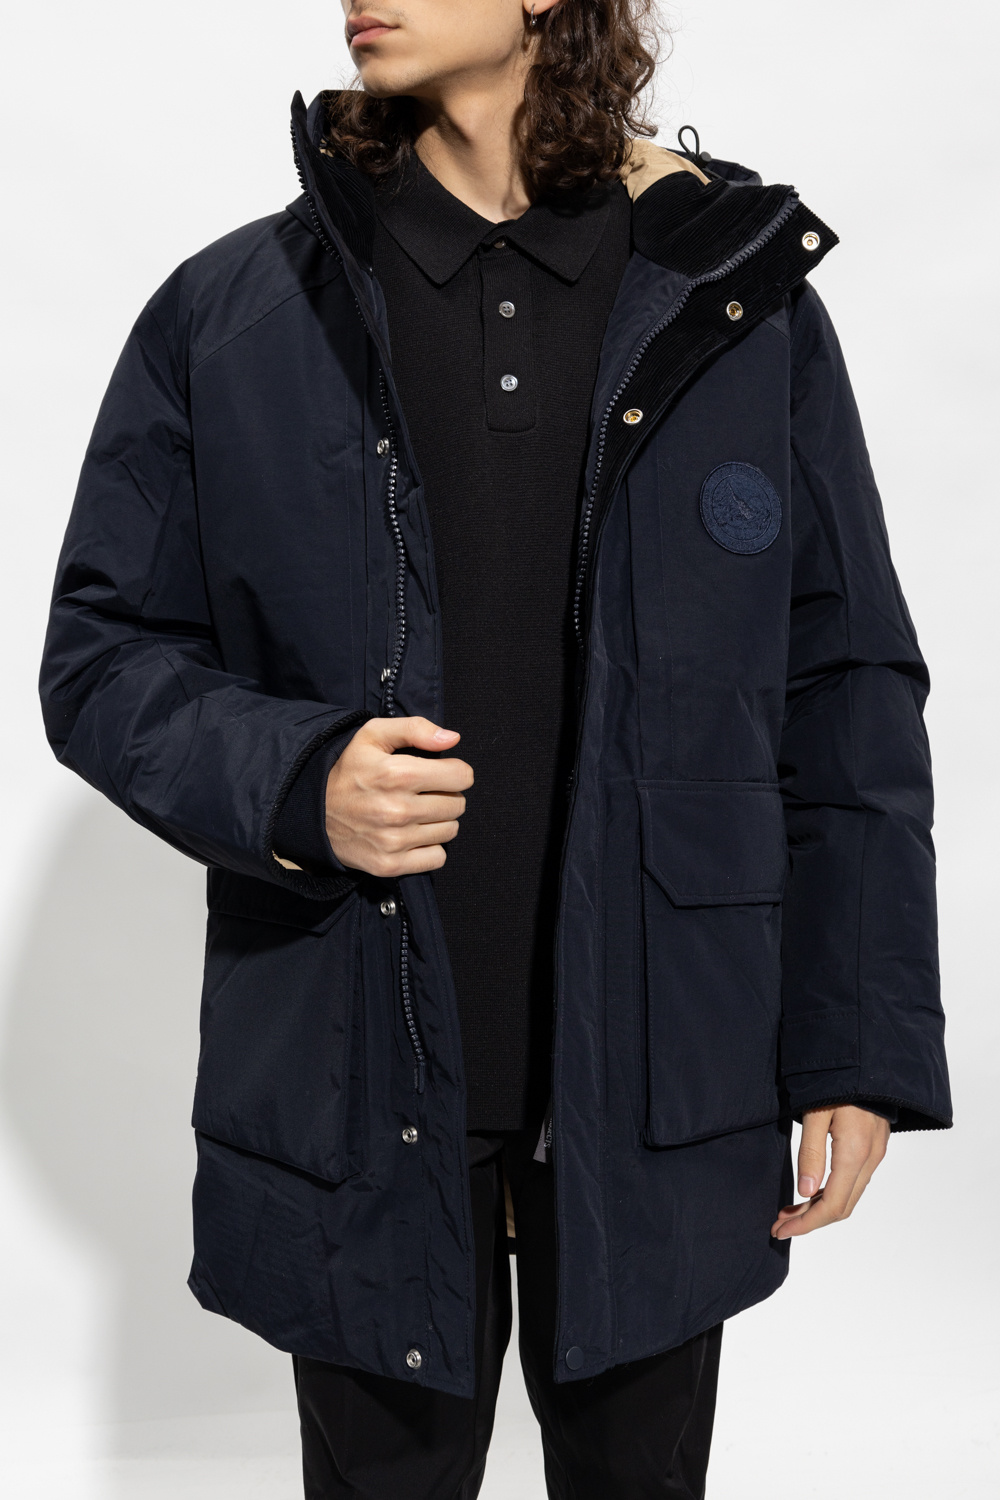 Norse Projects ‘Stavanger’ down jacket